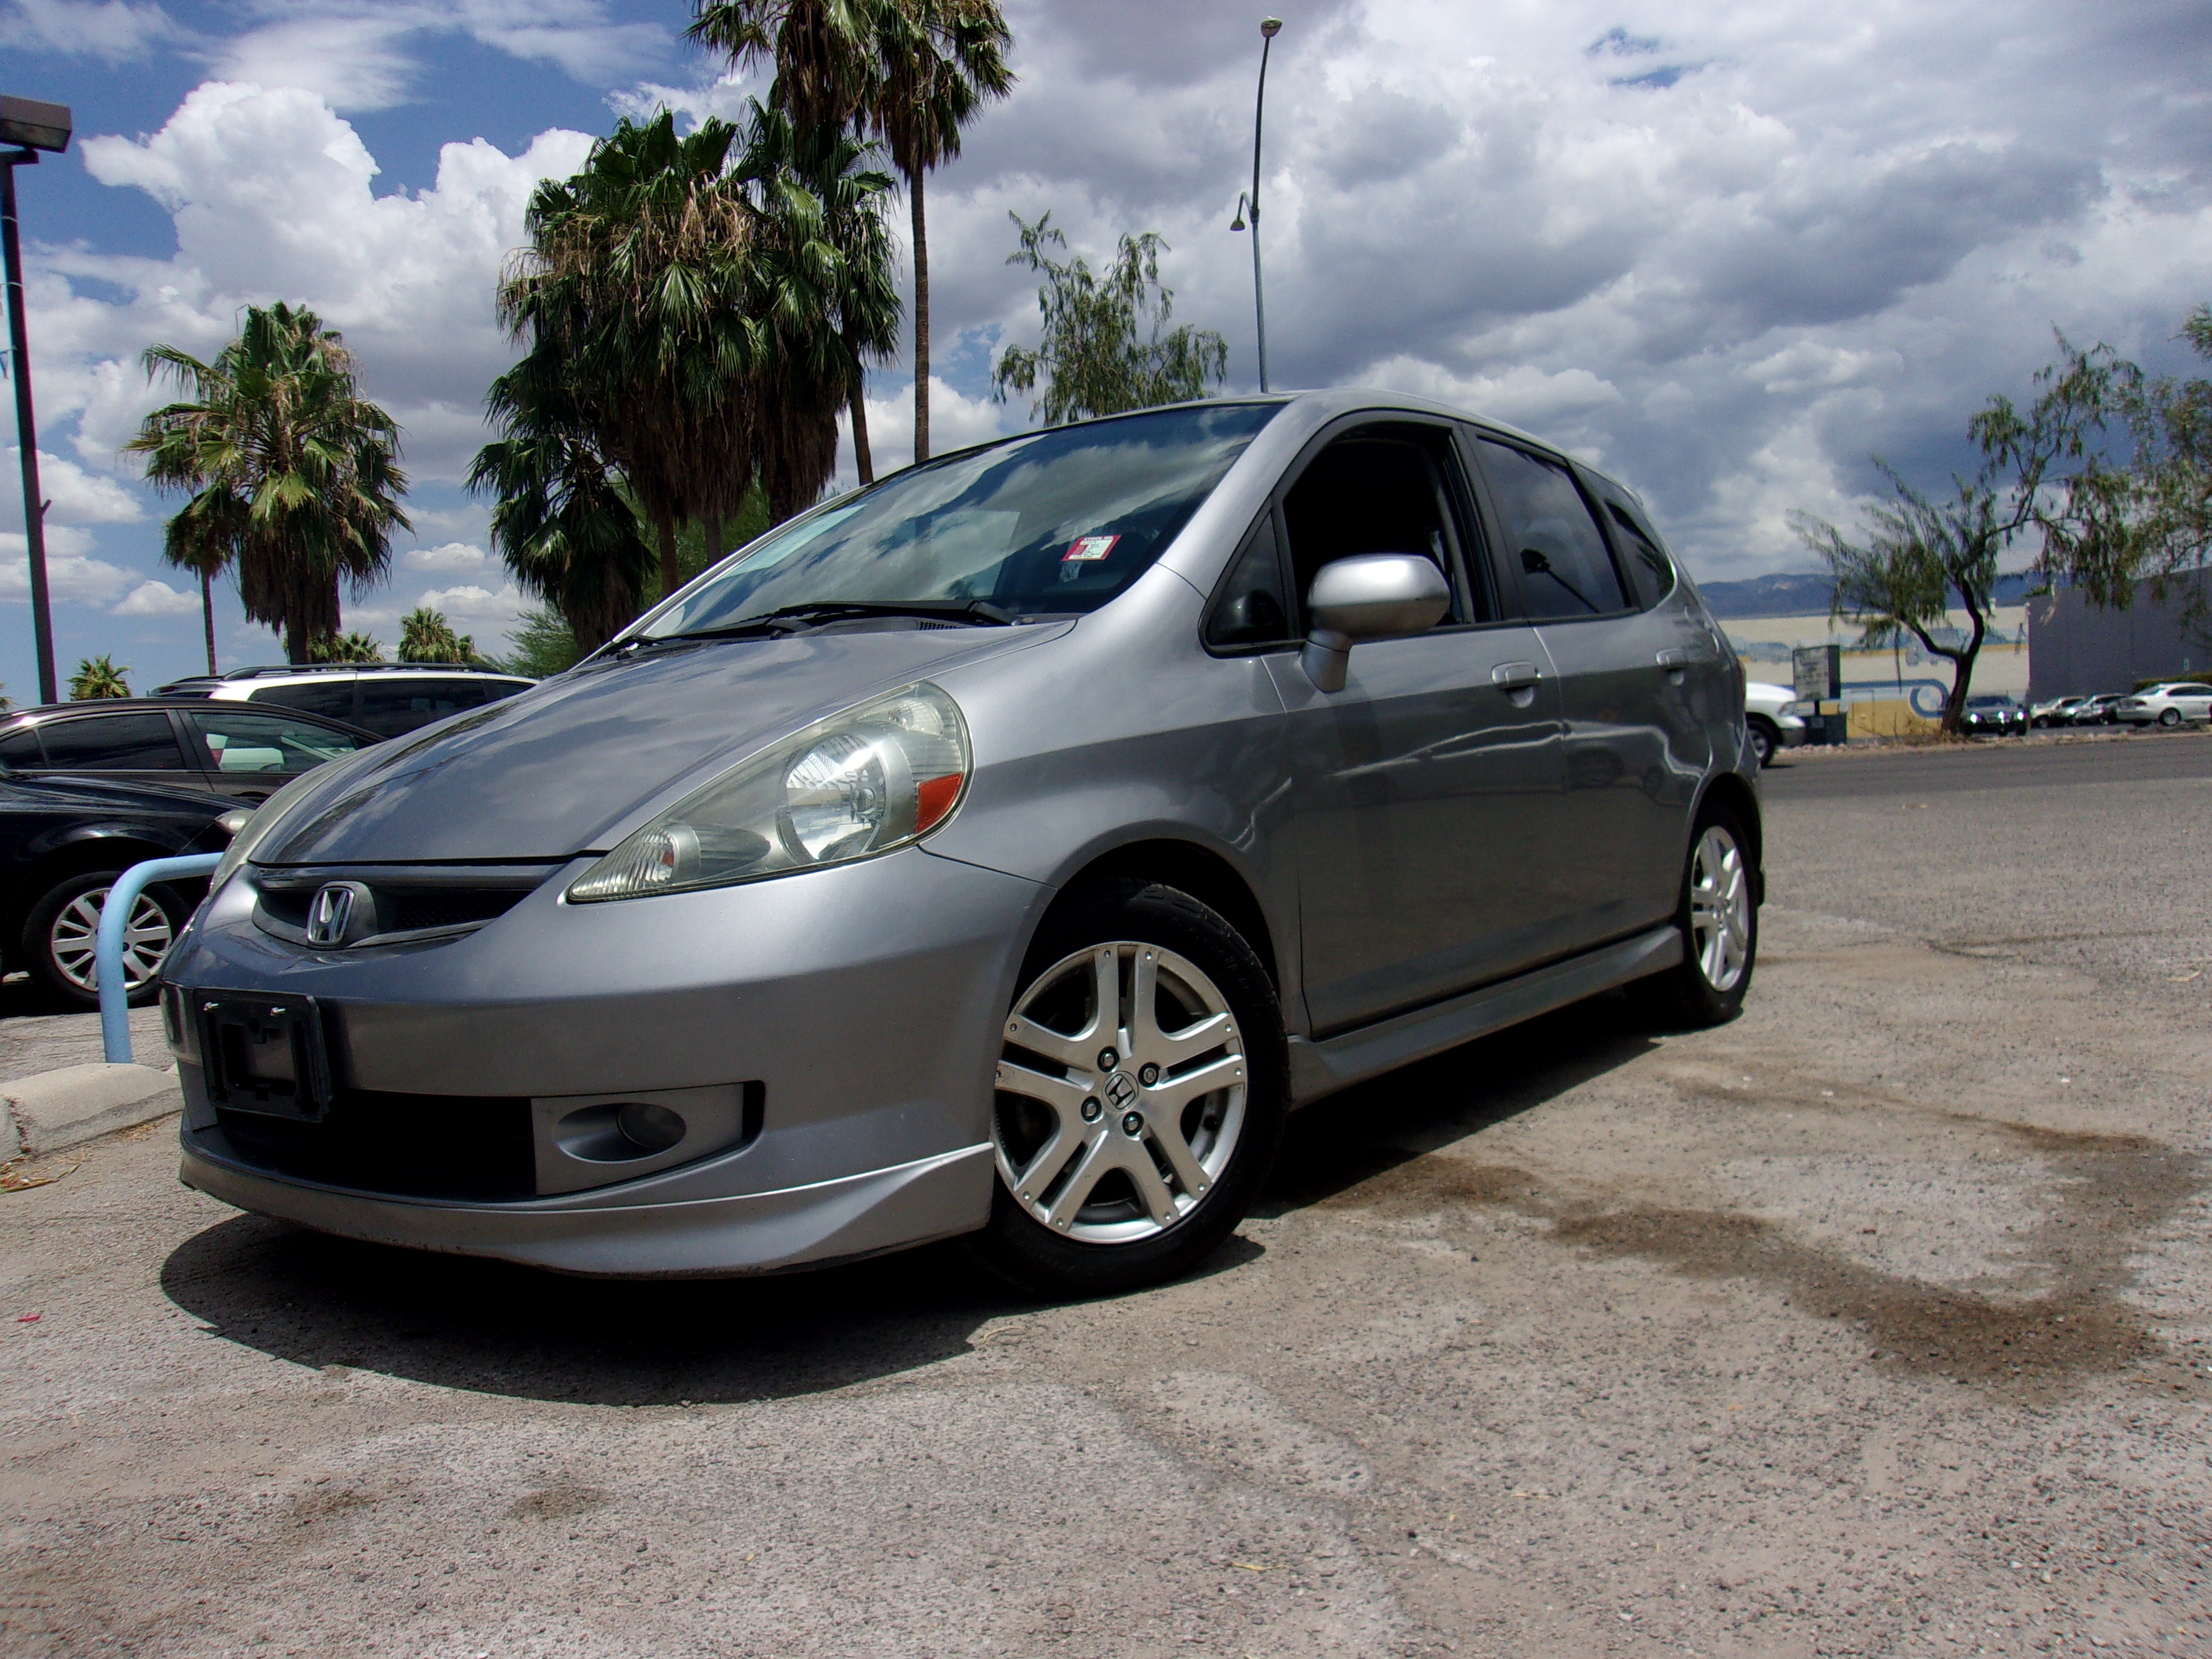 Pre-Owned 2007 Honda FIT 4dr Car in Tucson #S7552 | Tucson ...